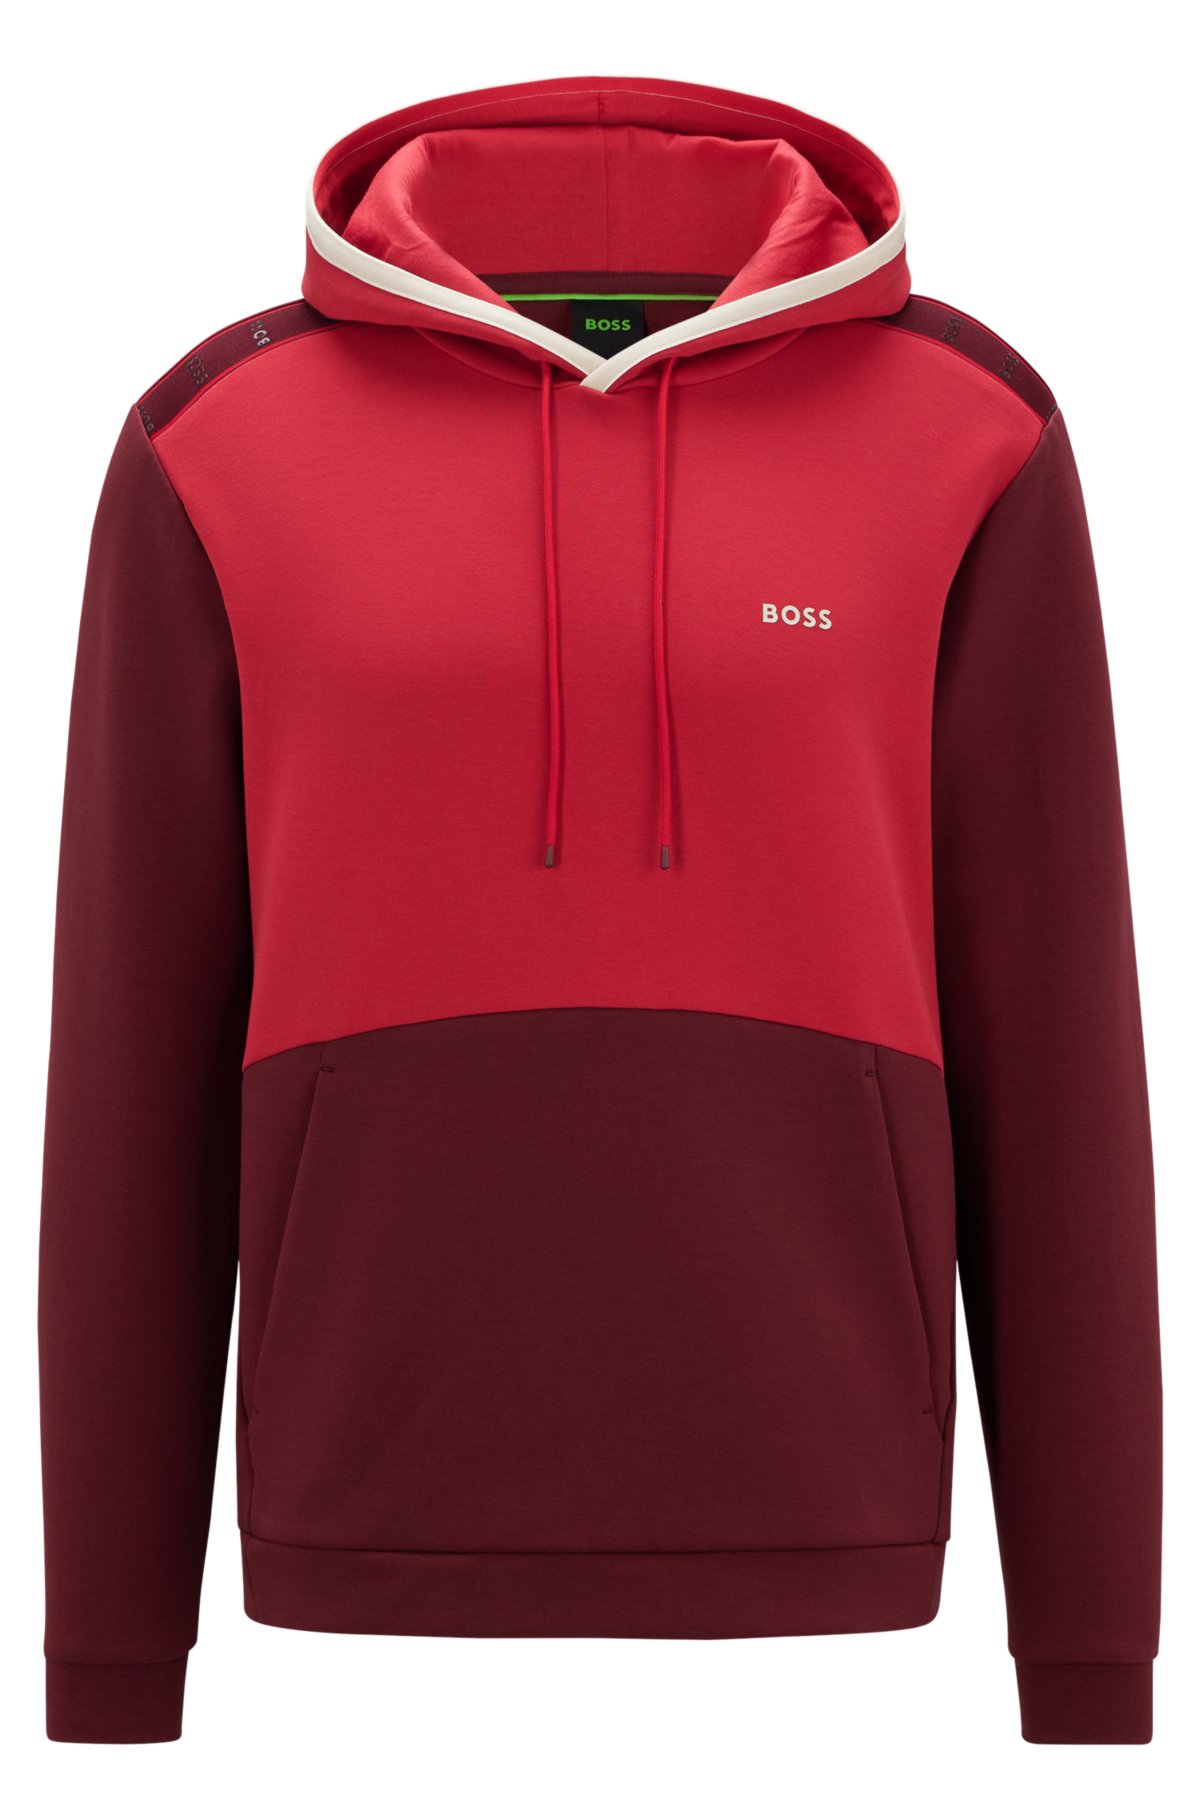 BOSS - Cotton-blend hoodie and logo with color-blocking tape